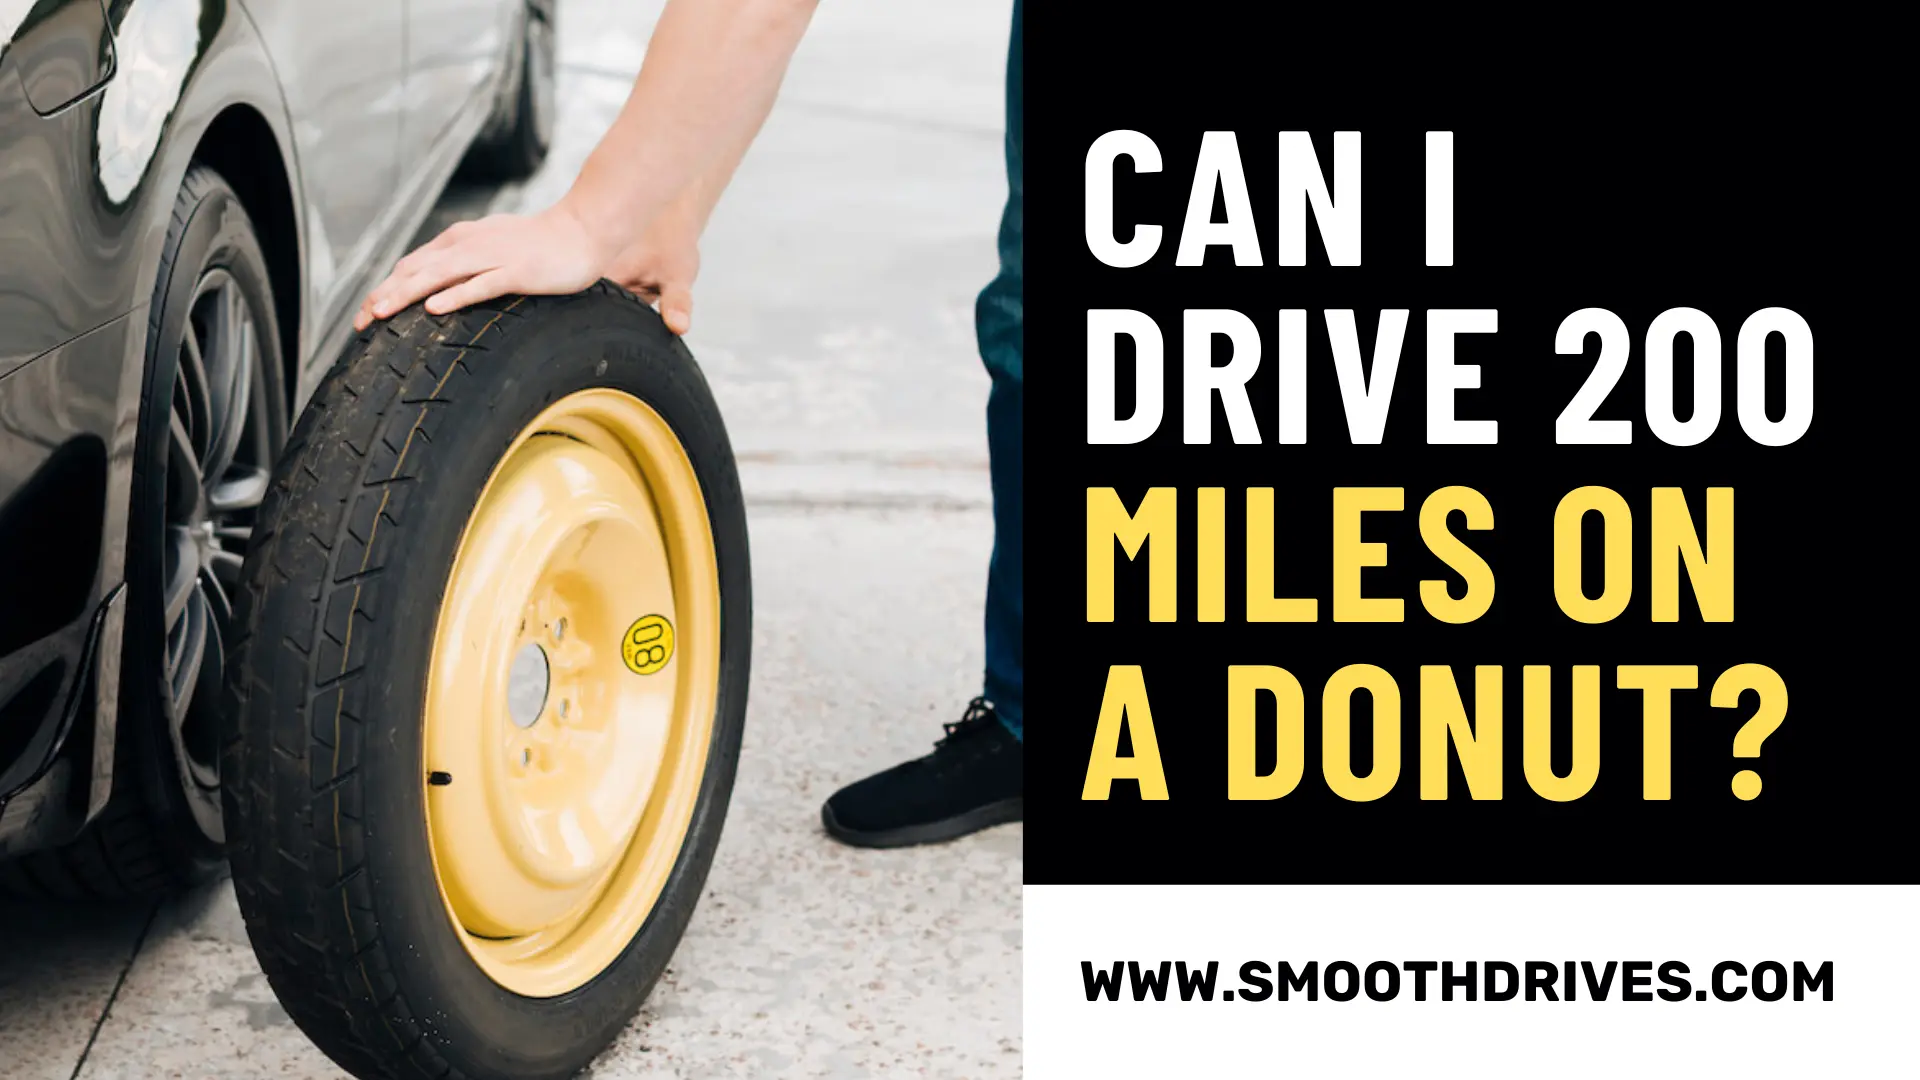 Can I Drive 200 Miles On A Donut? Find The Exact Answer!